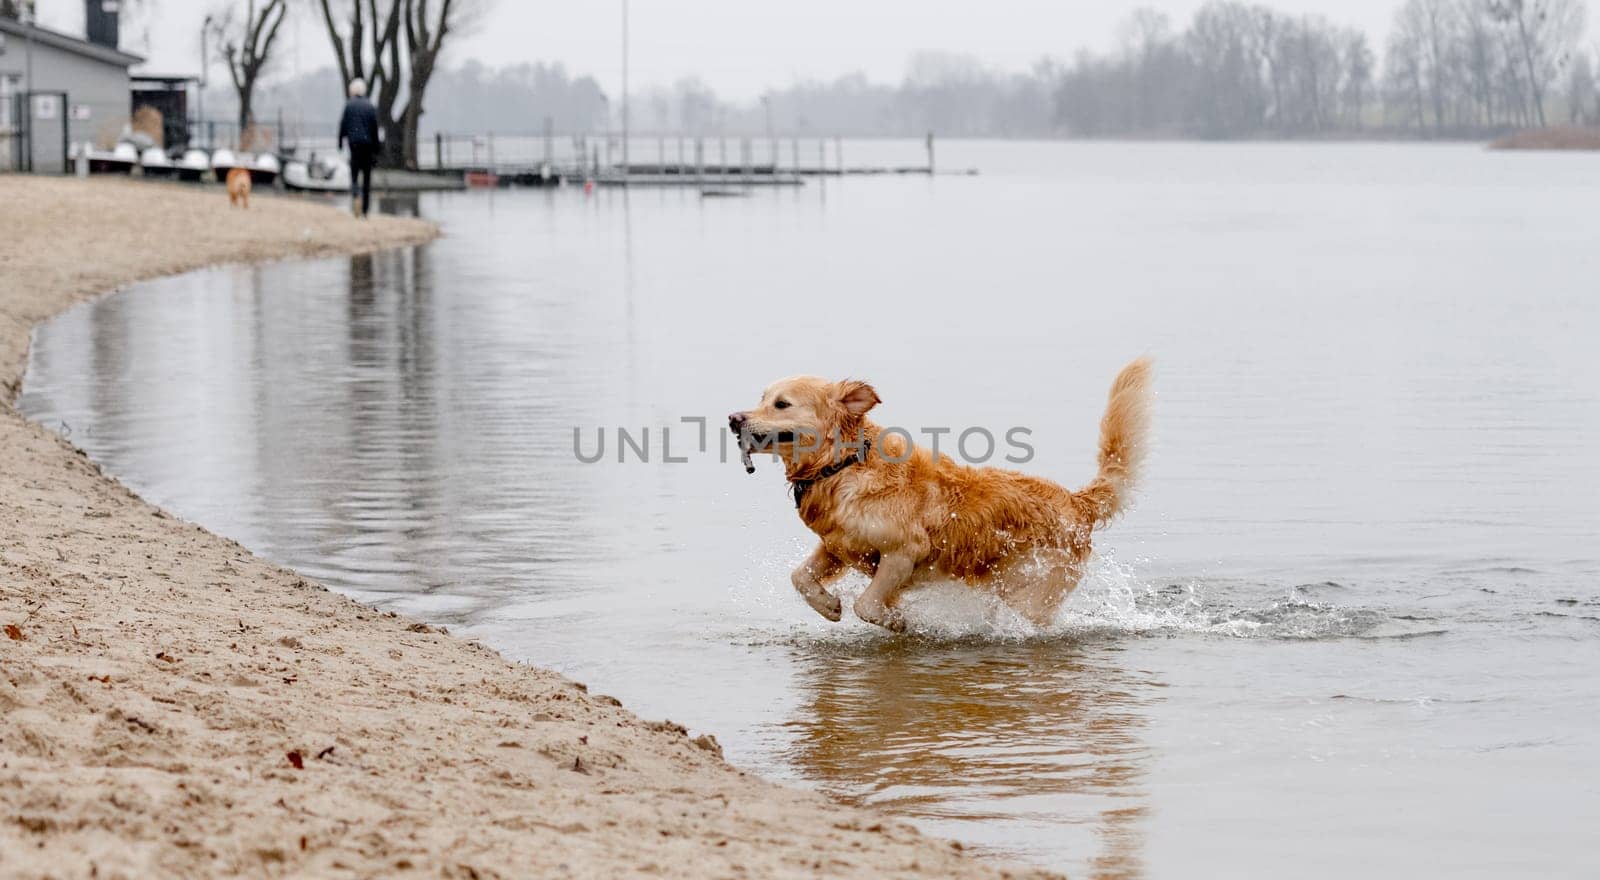 Golden Retriever Jumps Out Of Water With Stick In Mouth by tan4ikk1